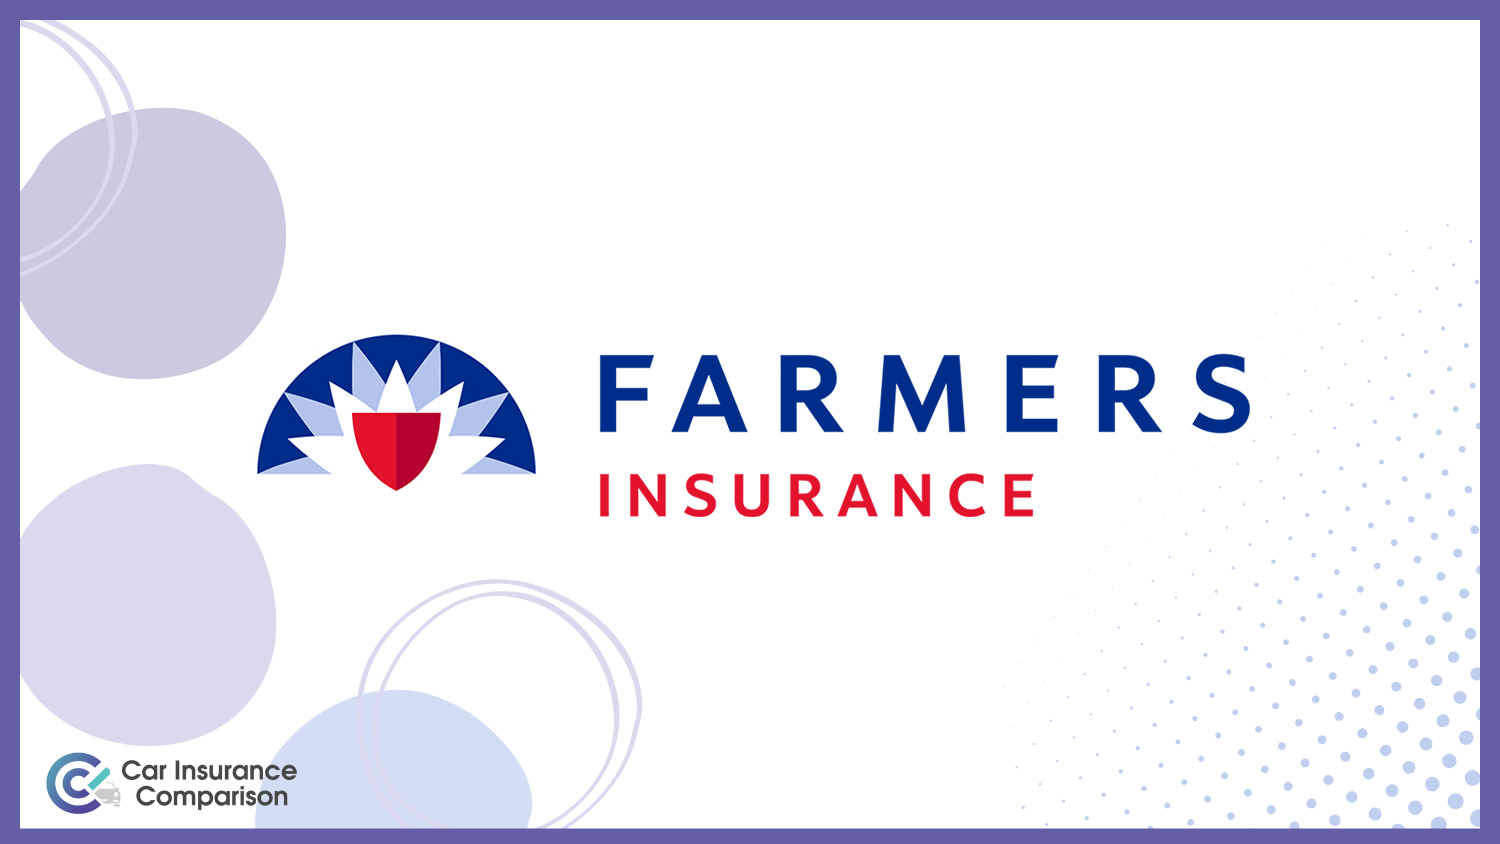 Farmers: Best Car Insurance for Home-Care Worker